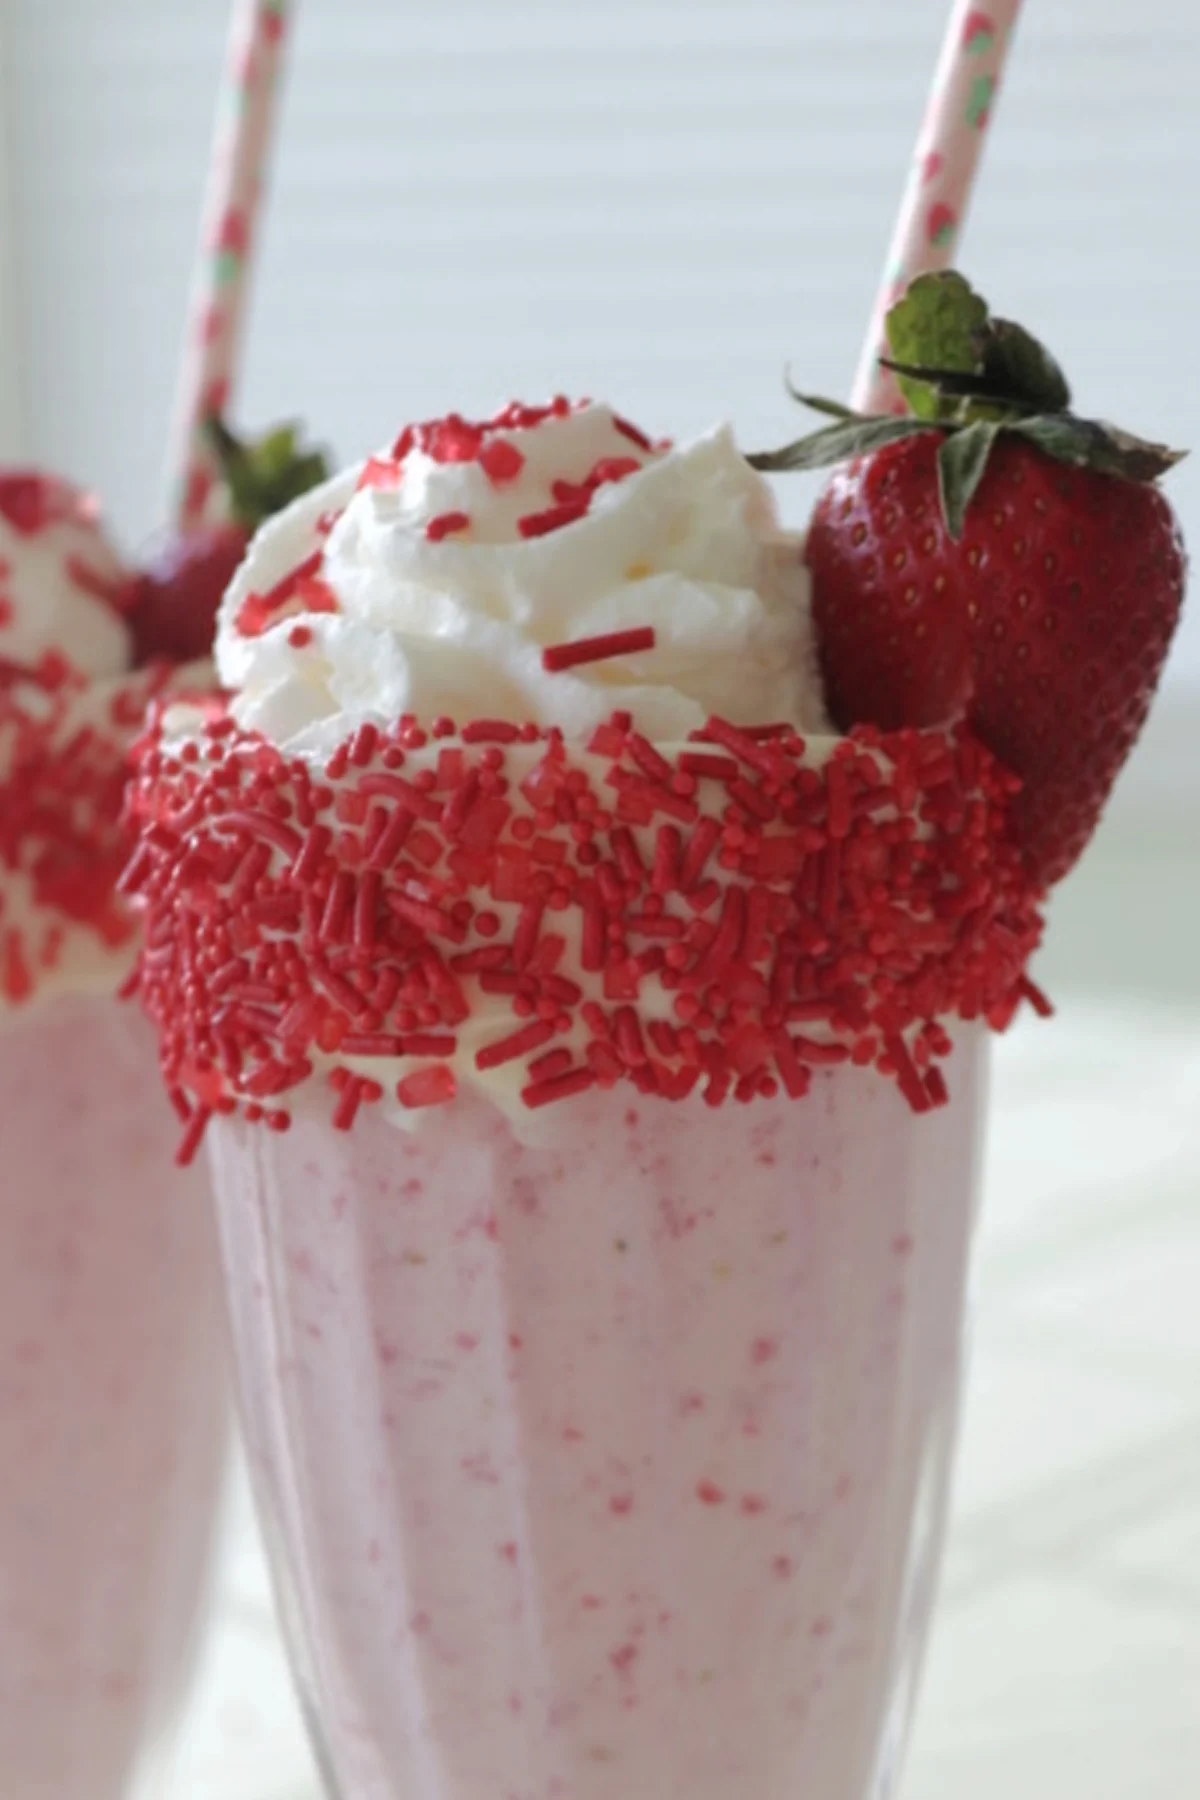 A strawberry milkshake with whipped cream and sprinkles garnished with a strawberry.